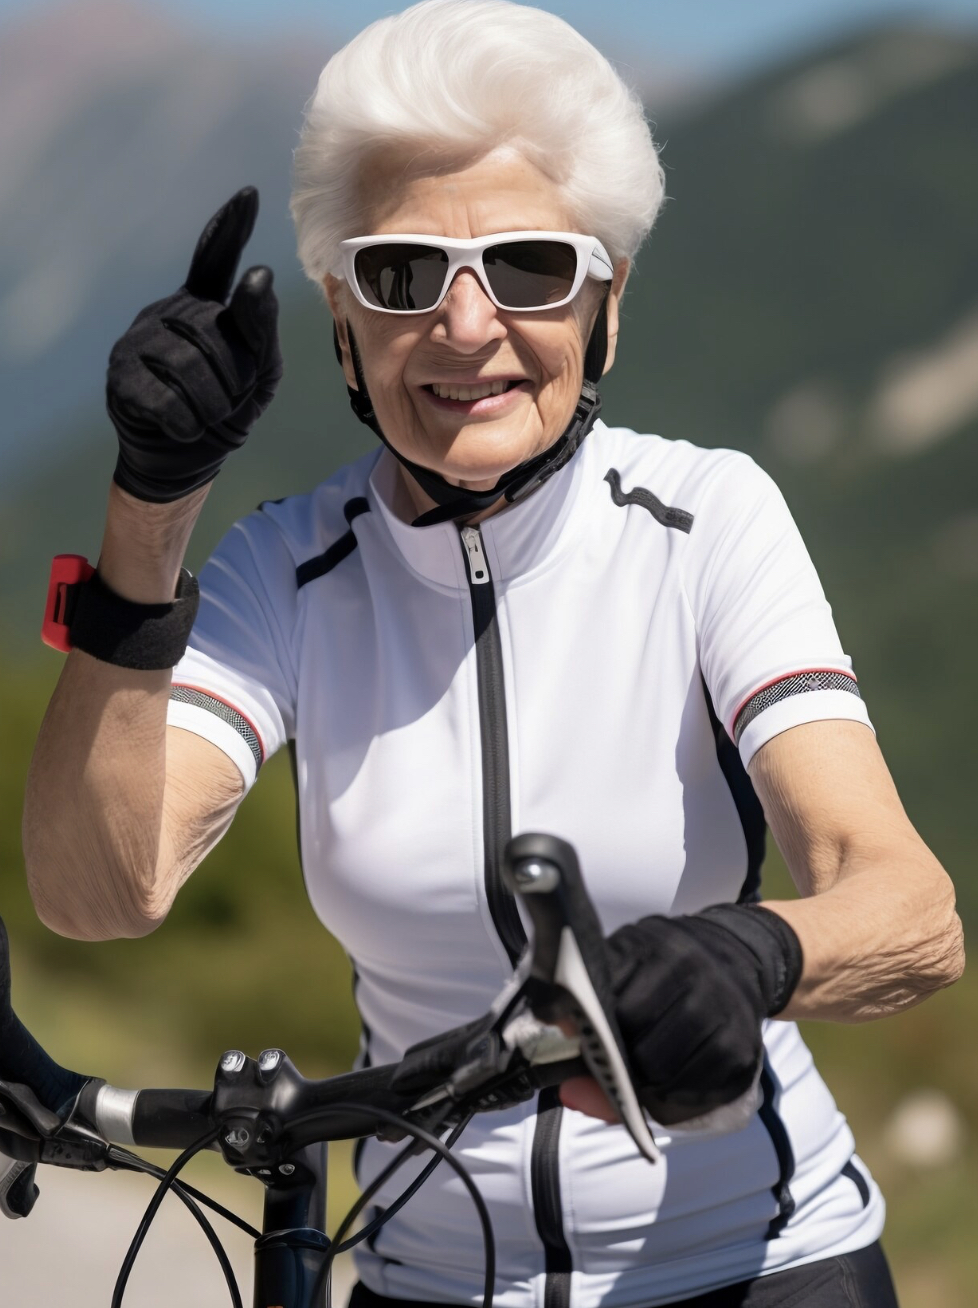 What Is The Peak Age For A Cyclist?